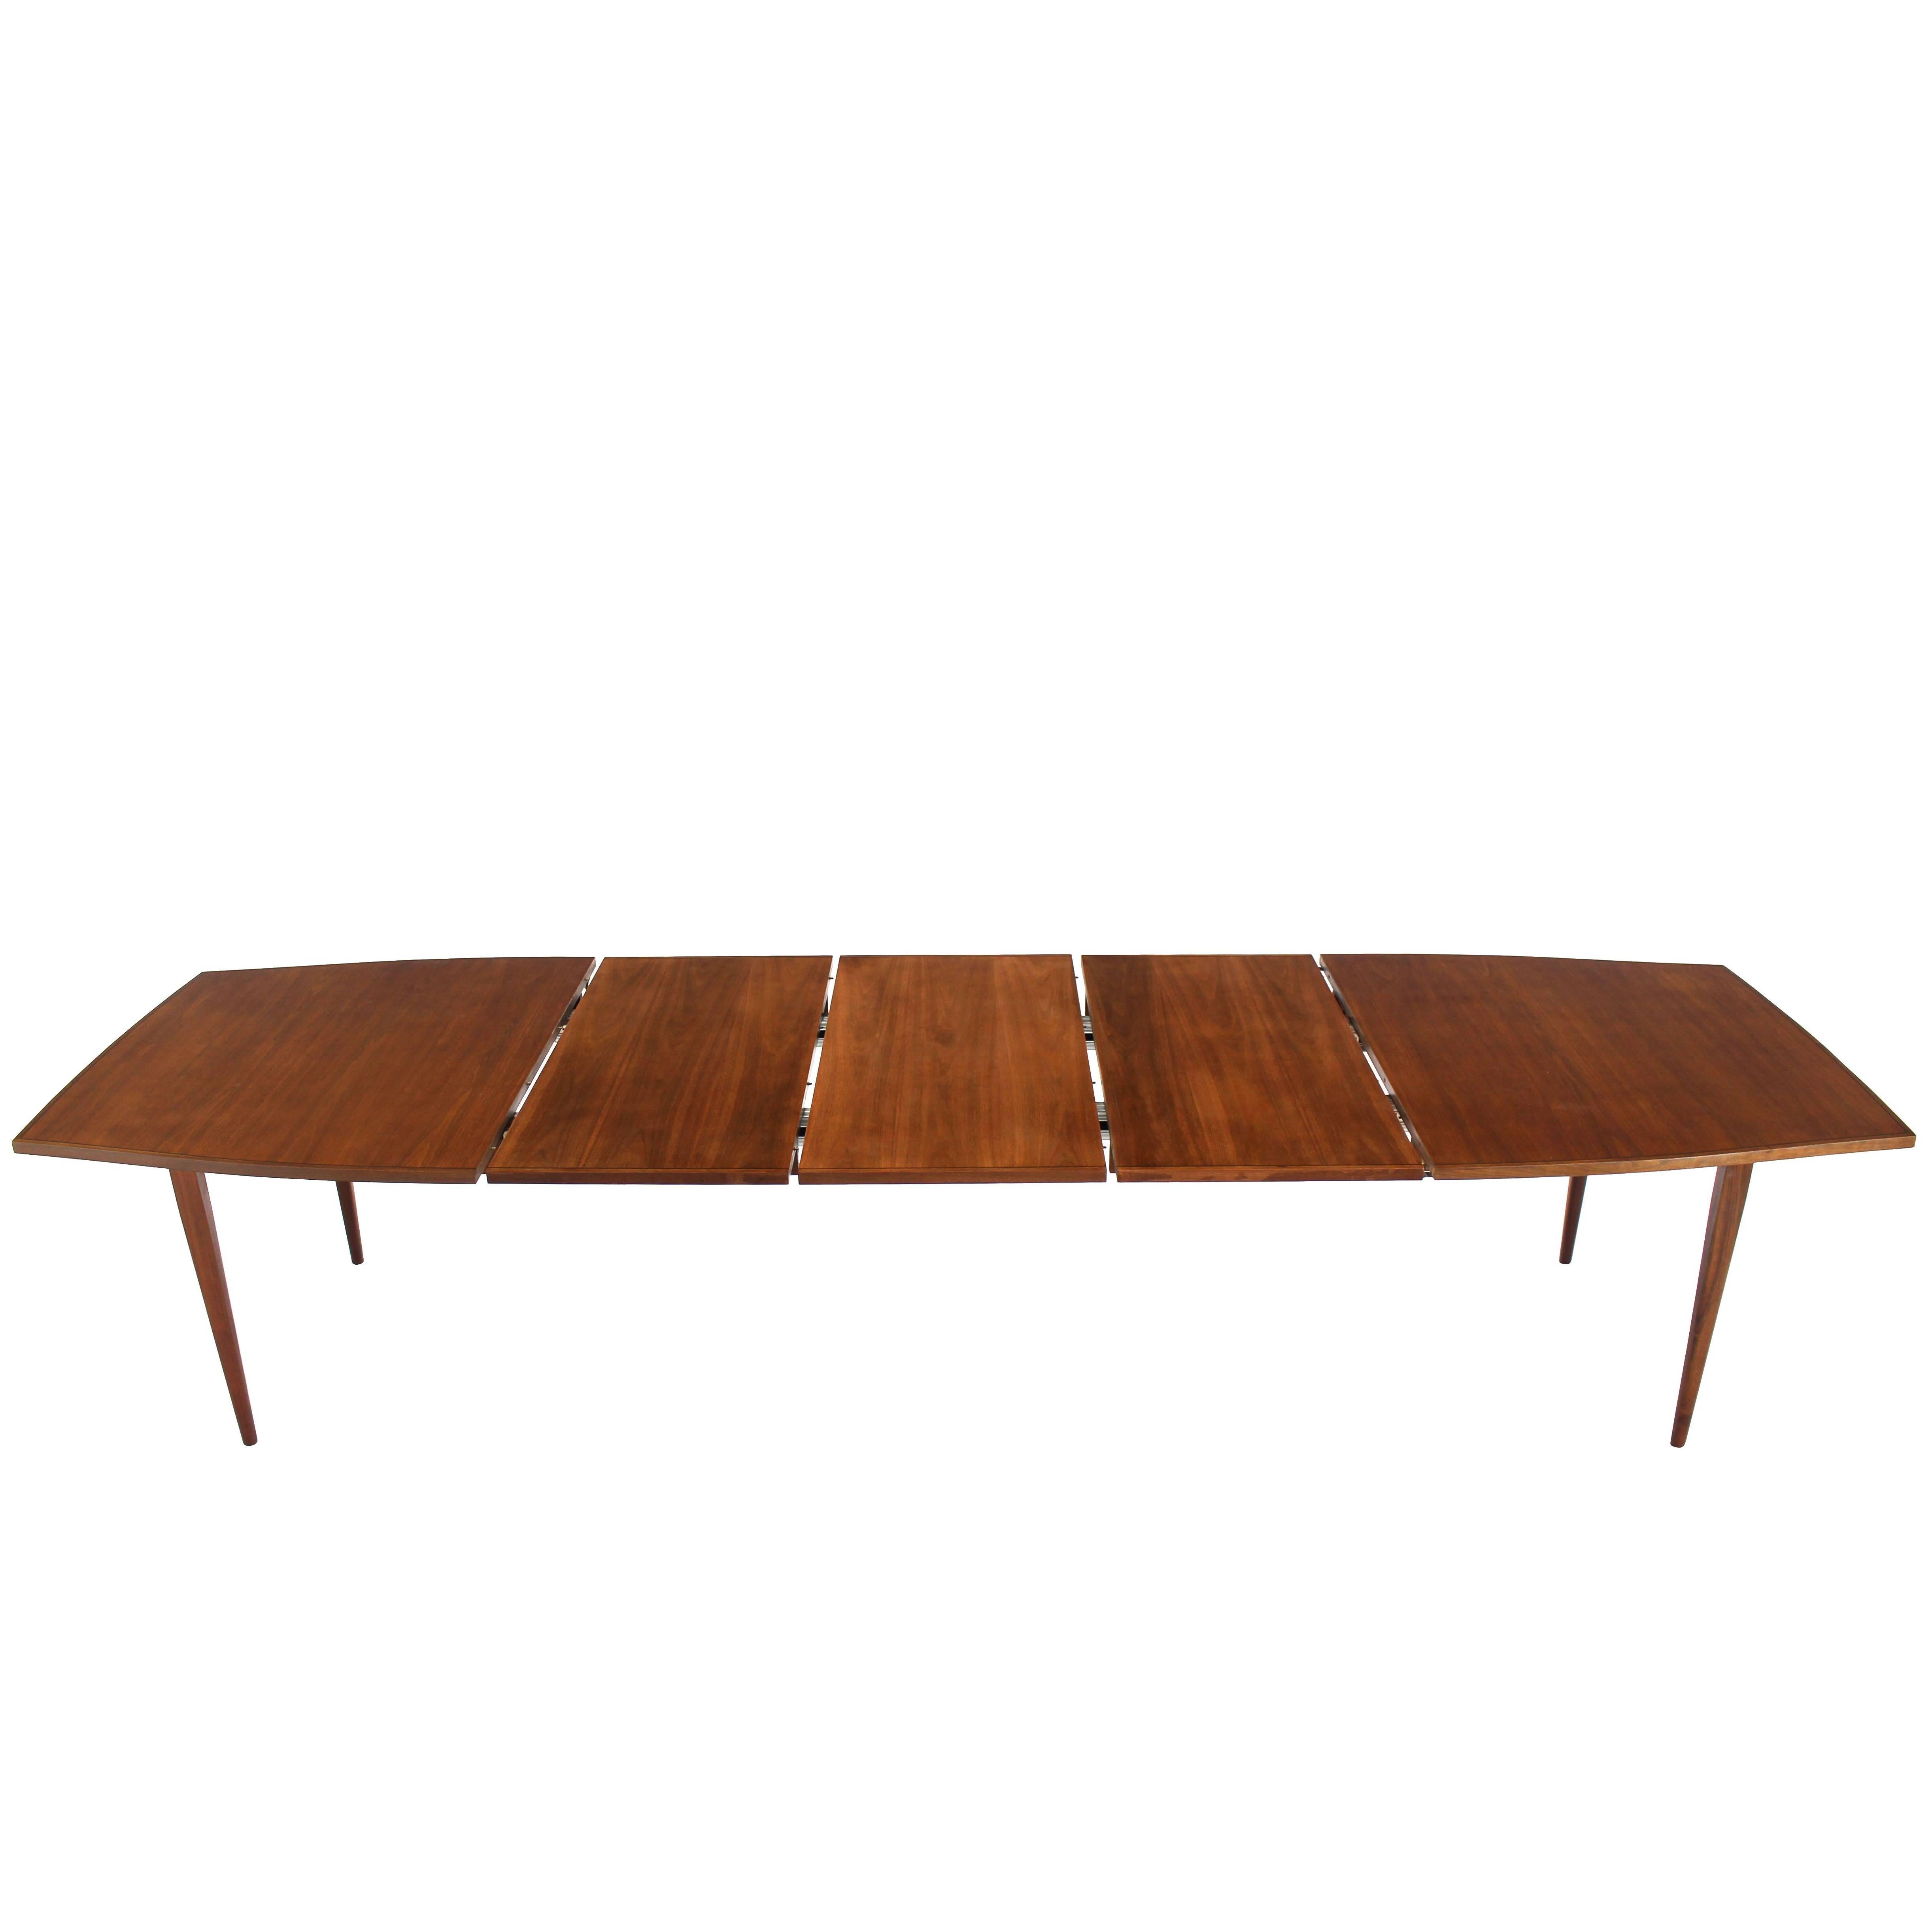 Large Walnut Dining Table by Directional